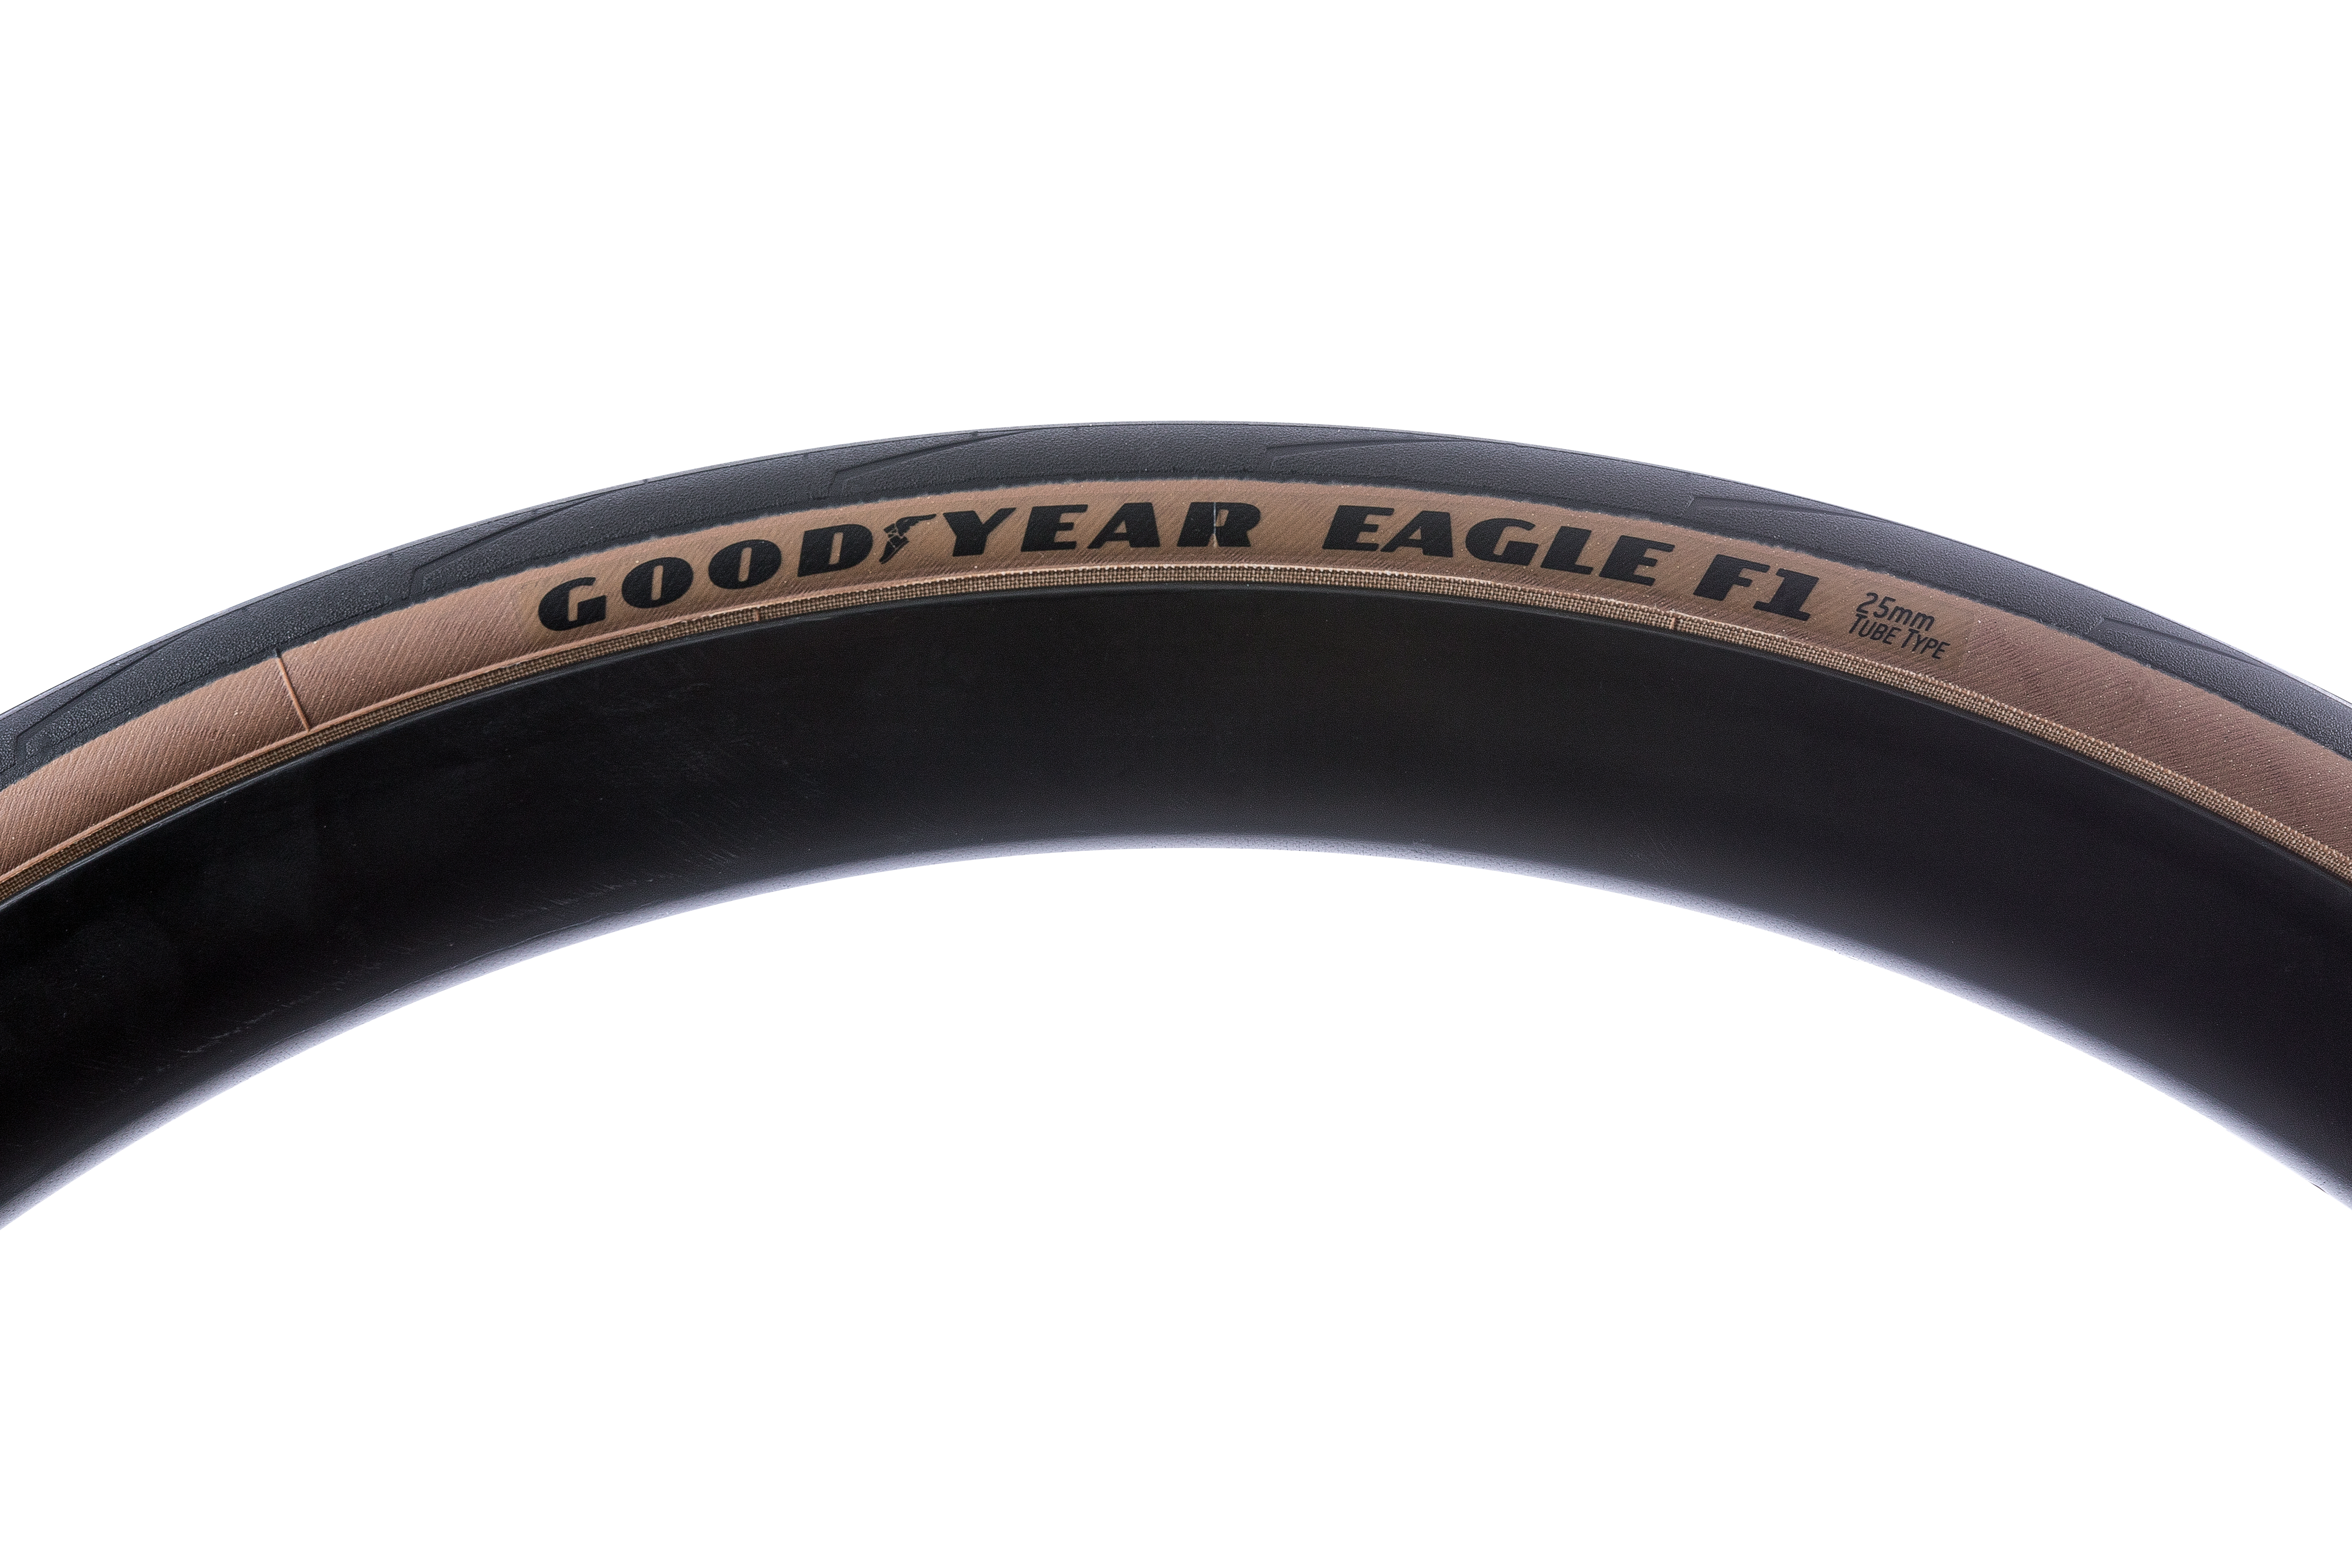 The Eagle F1 in tan sidewall version.